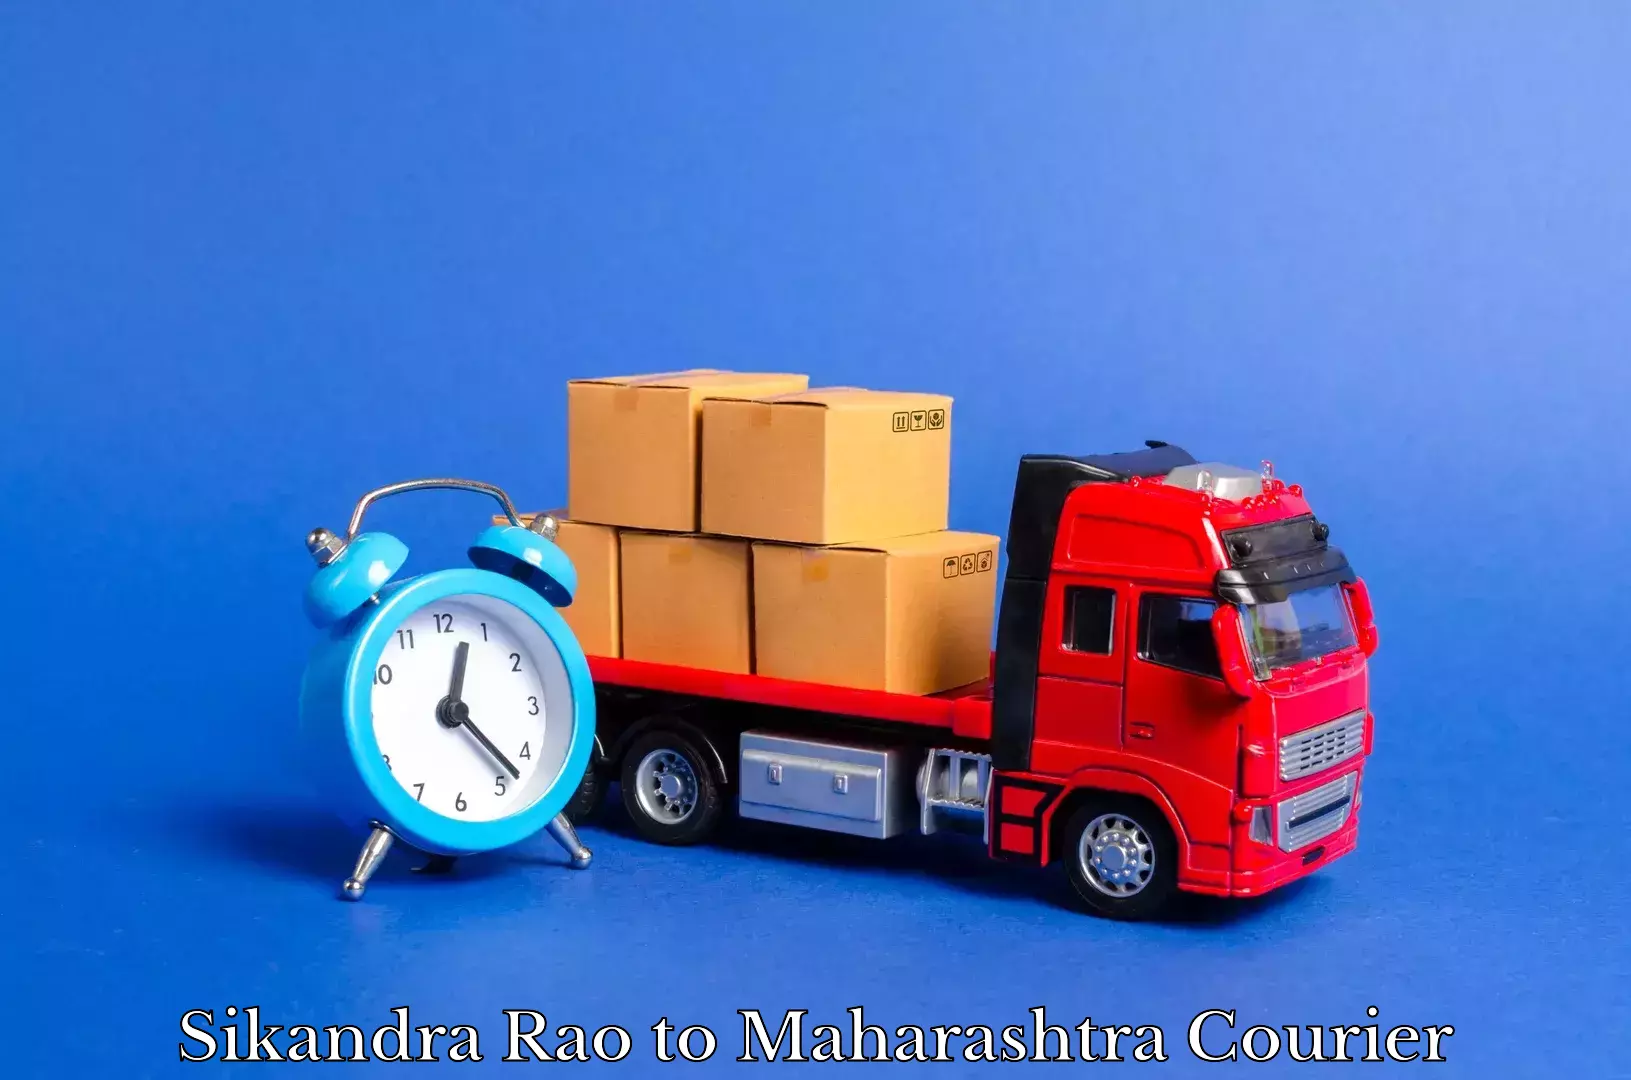 Trusted furniture movers in Sikandra Rao to Shirdi